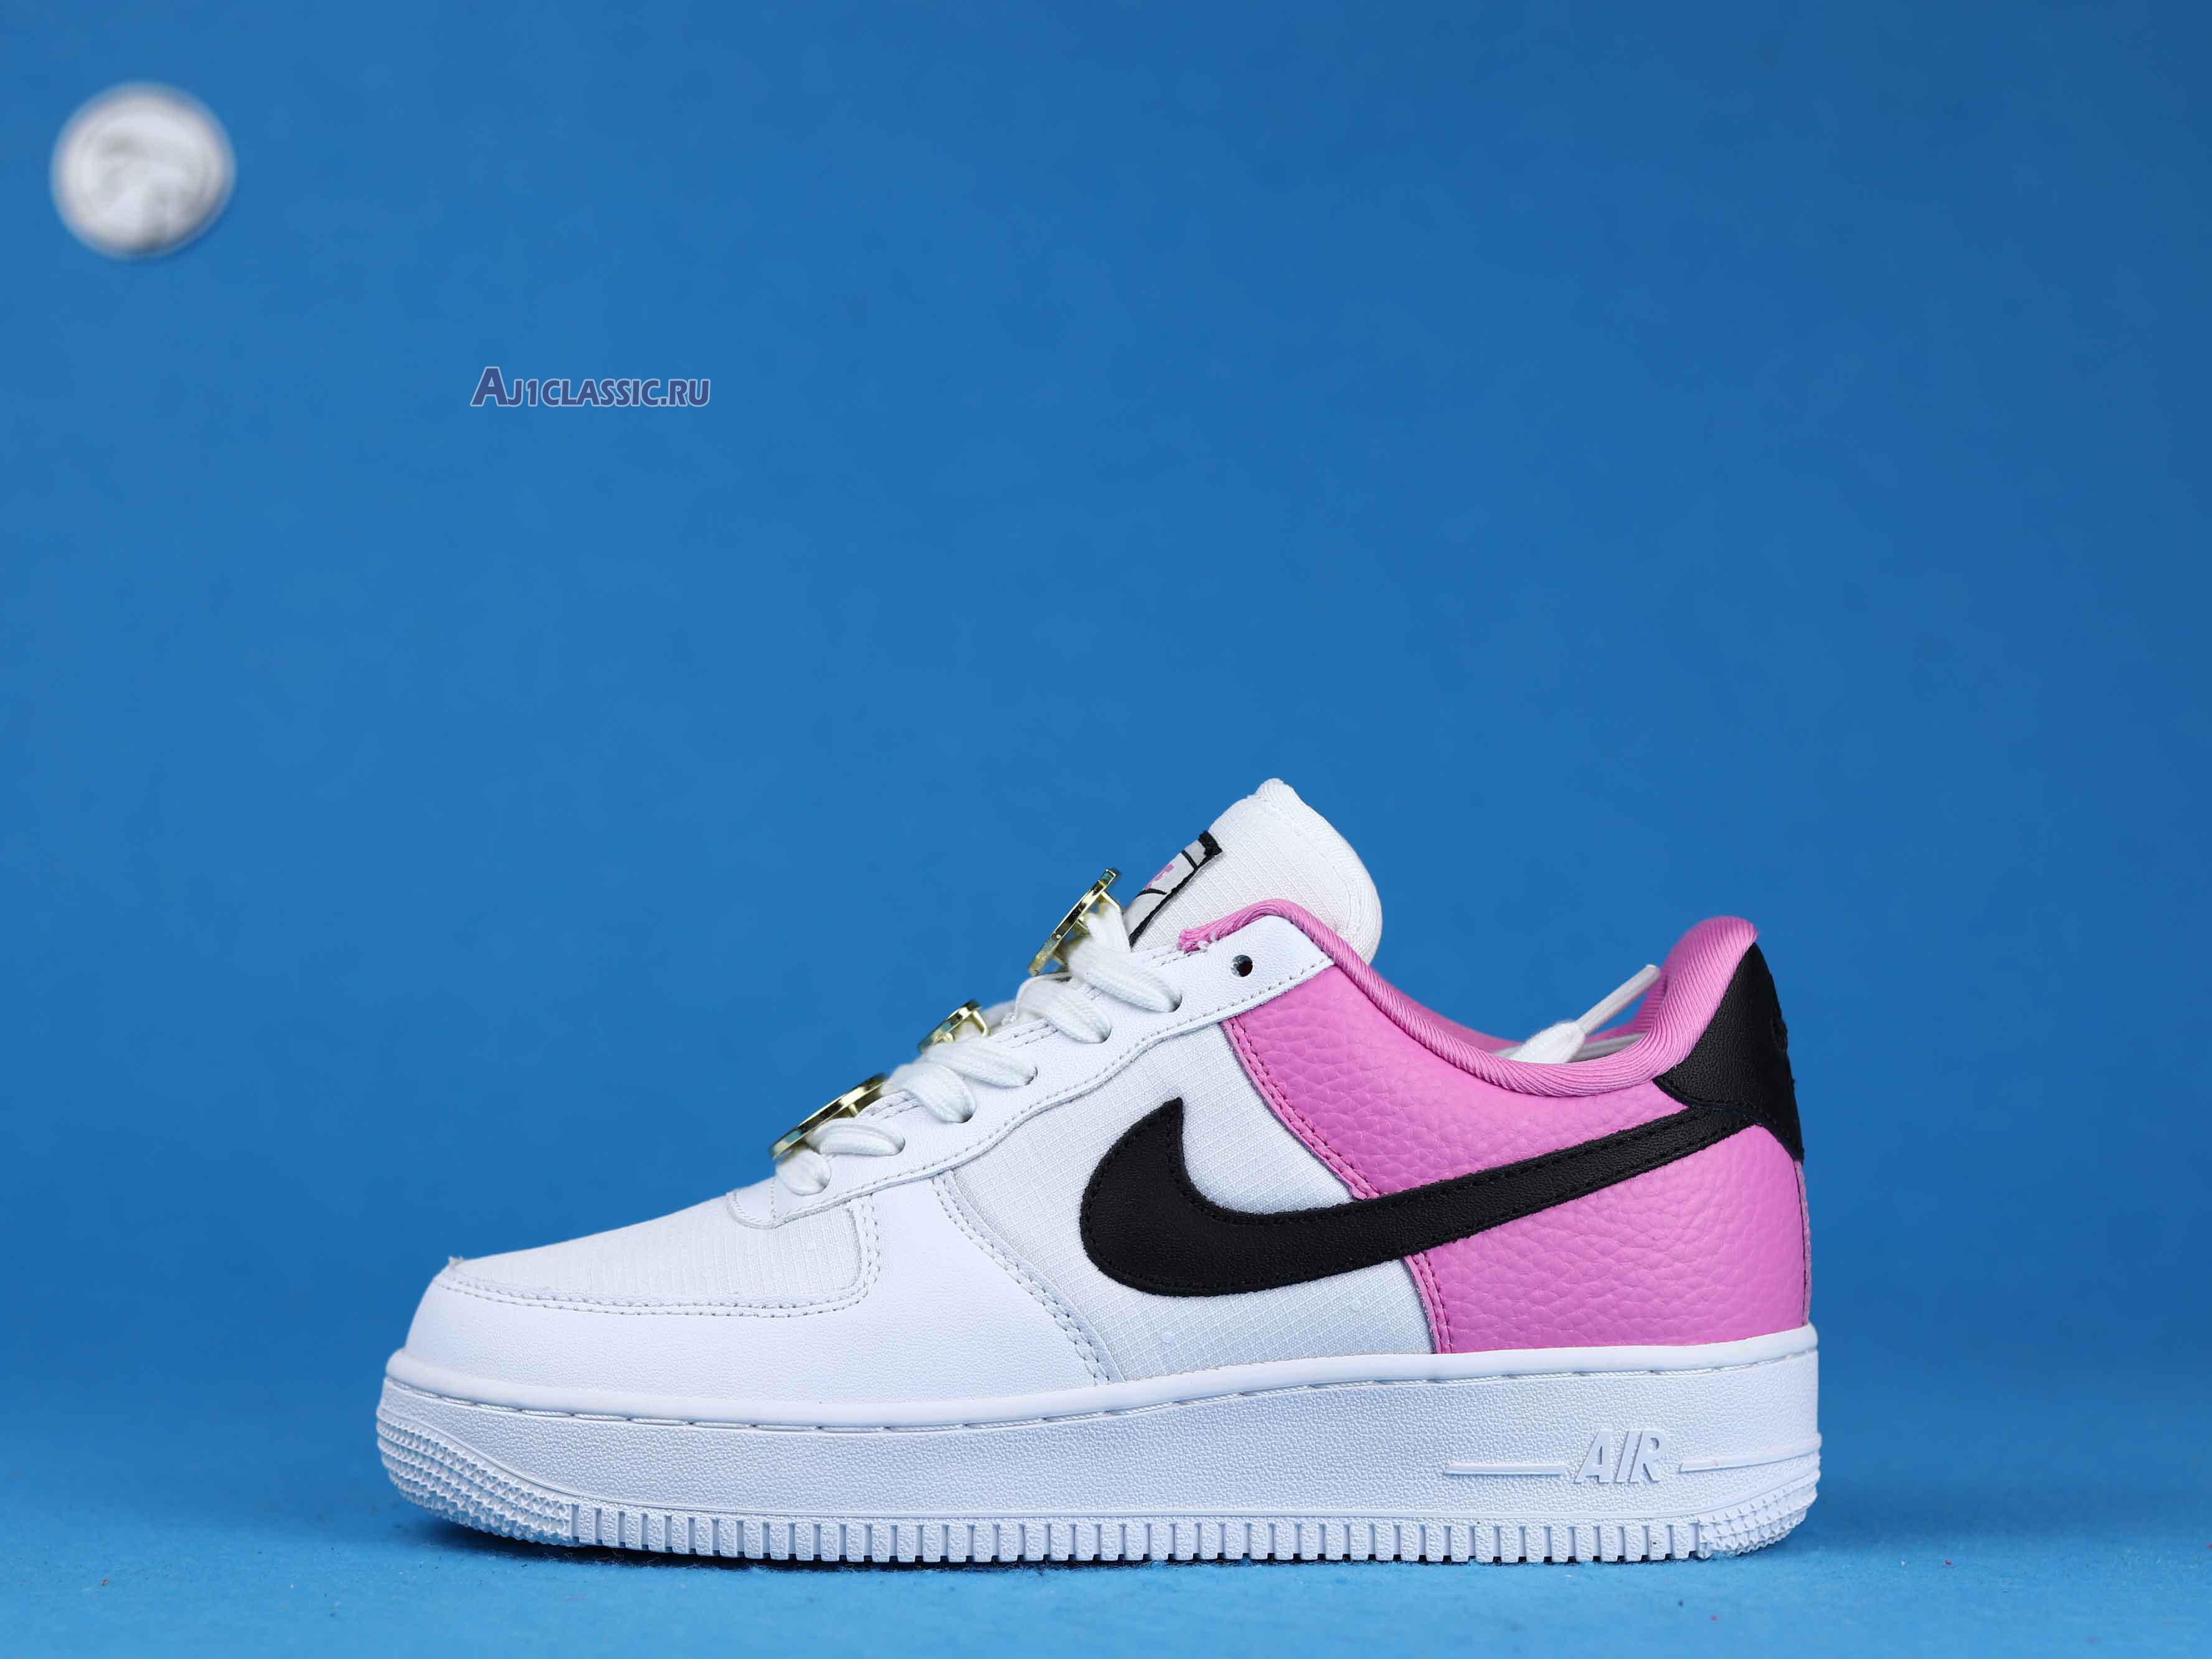 Nike Wmns Air Force 1 Low SE "Basketball Pins" AA0287-107